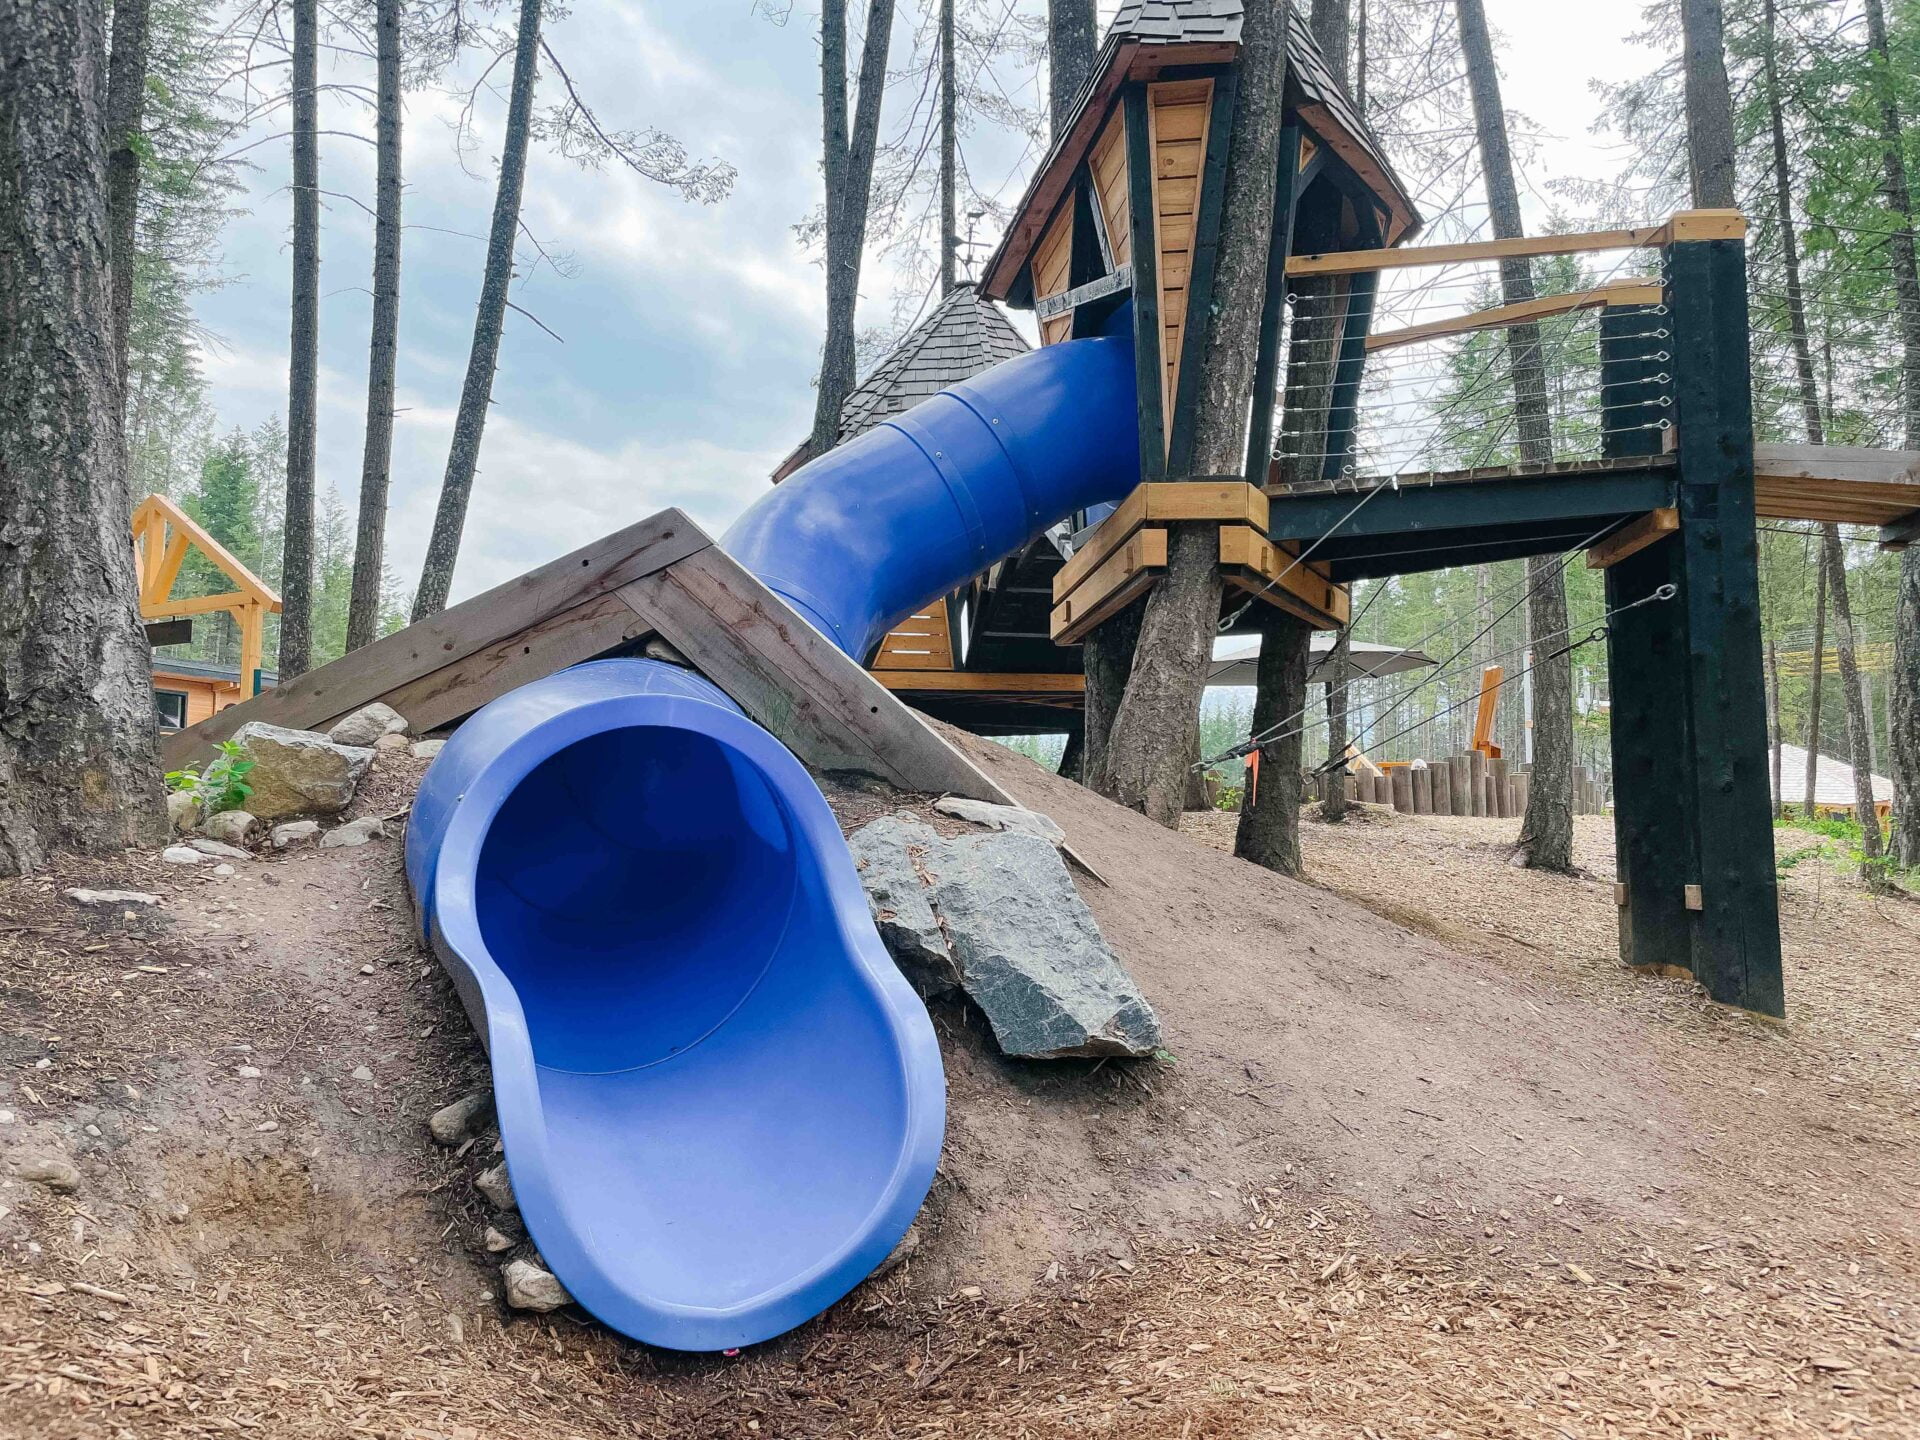 treehouse with a curving blue slide coming out the side